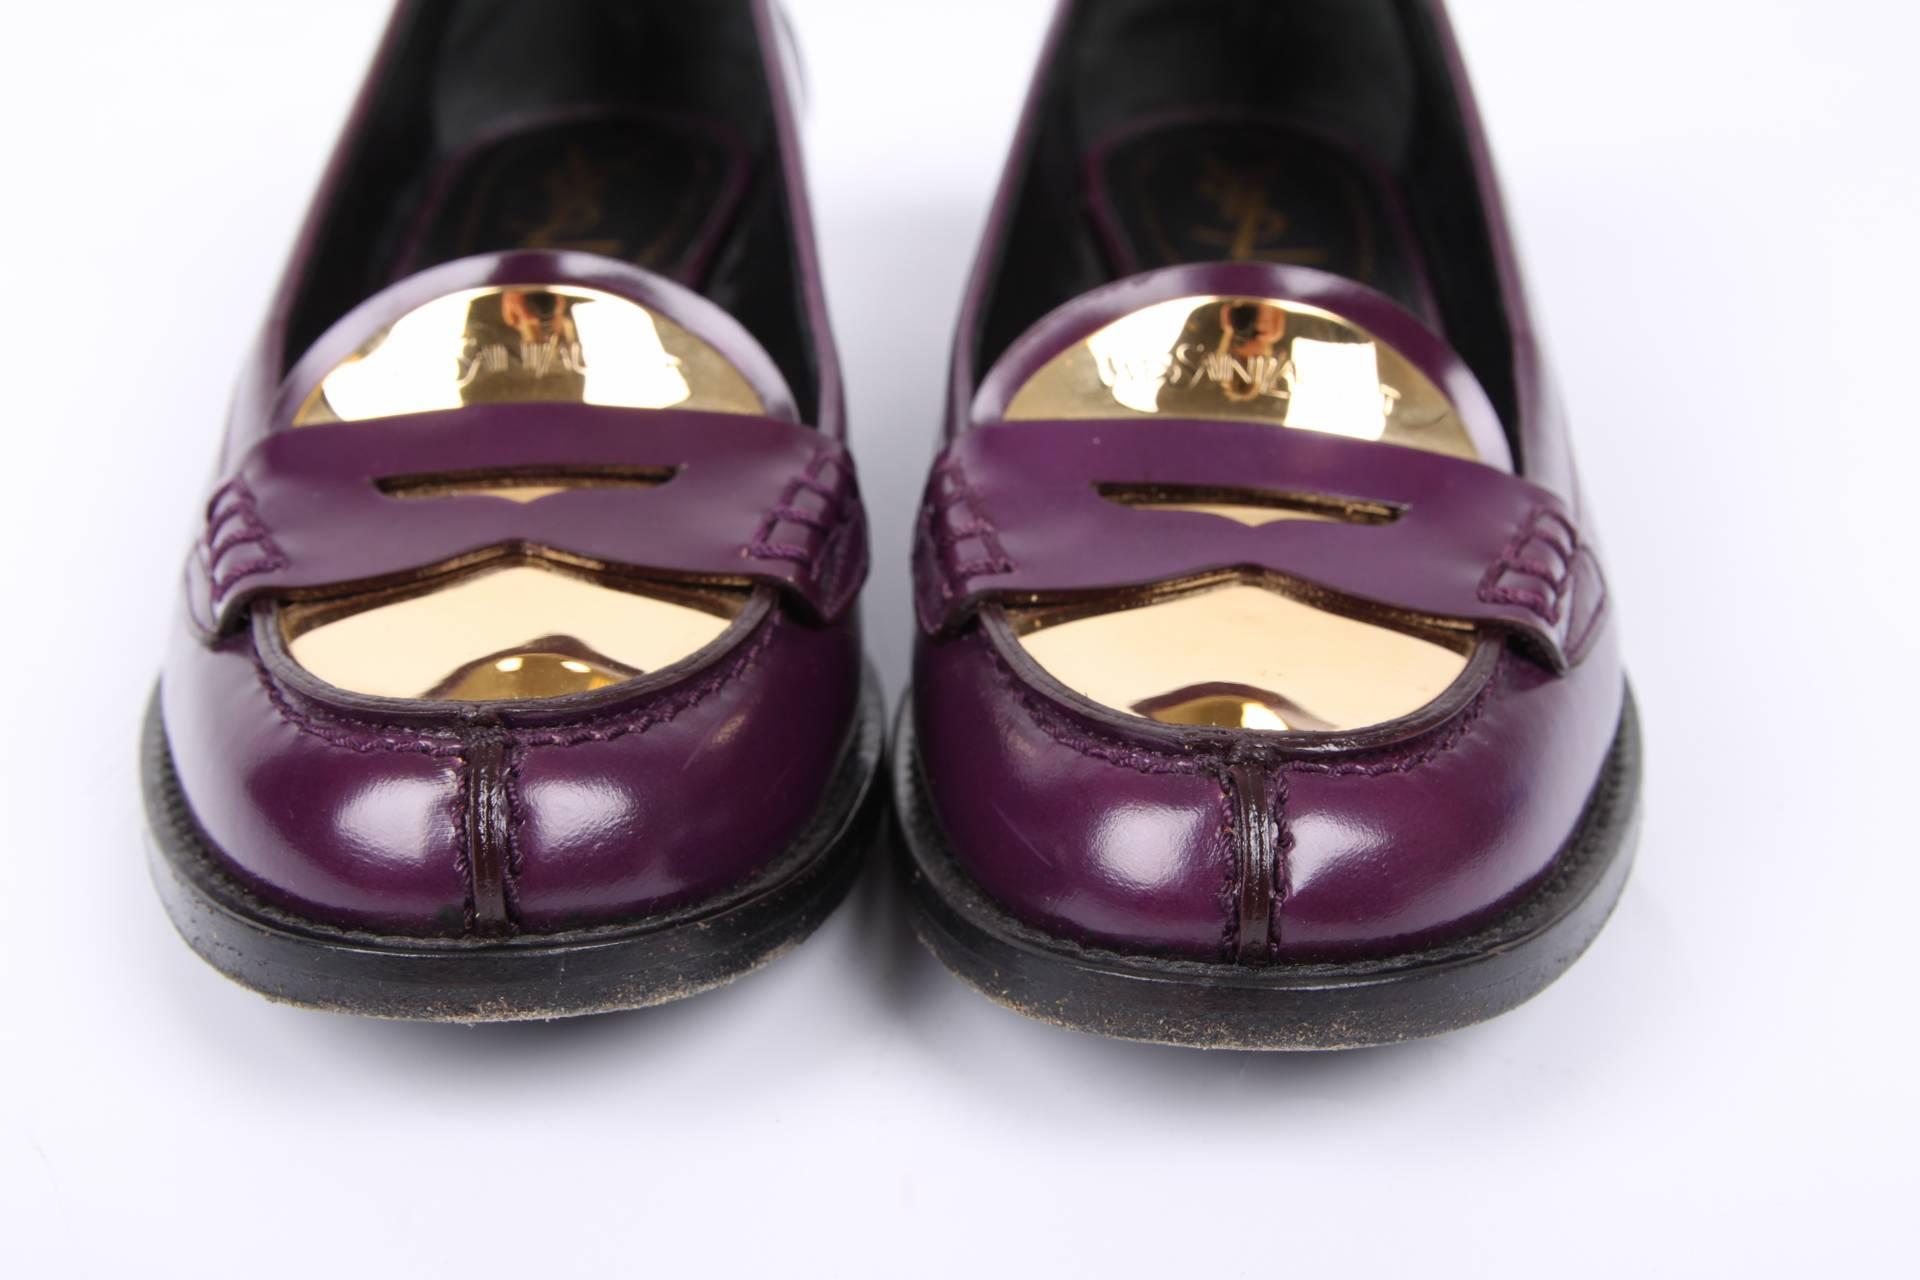 Nice pair of penny loafers by Yves Saint Laurent crafted in purple colored leather with gold-tone detailing at the toe.

The heel measures 2,5 centimeters, outsole made of leather. Fully lined with black leather, a gold-tone YSL Paris logo on the